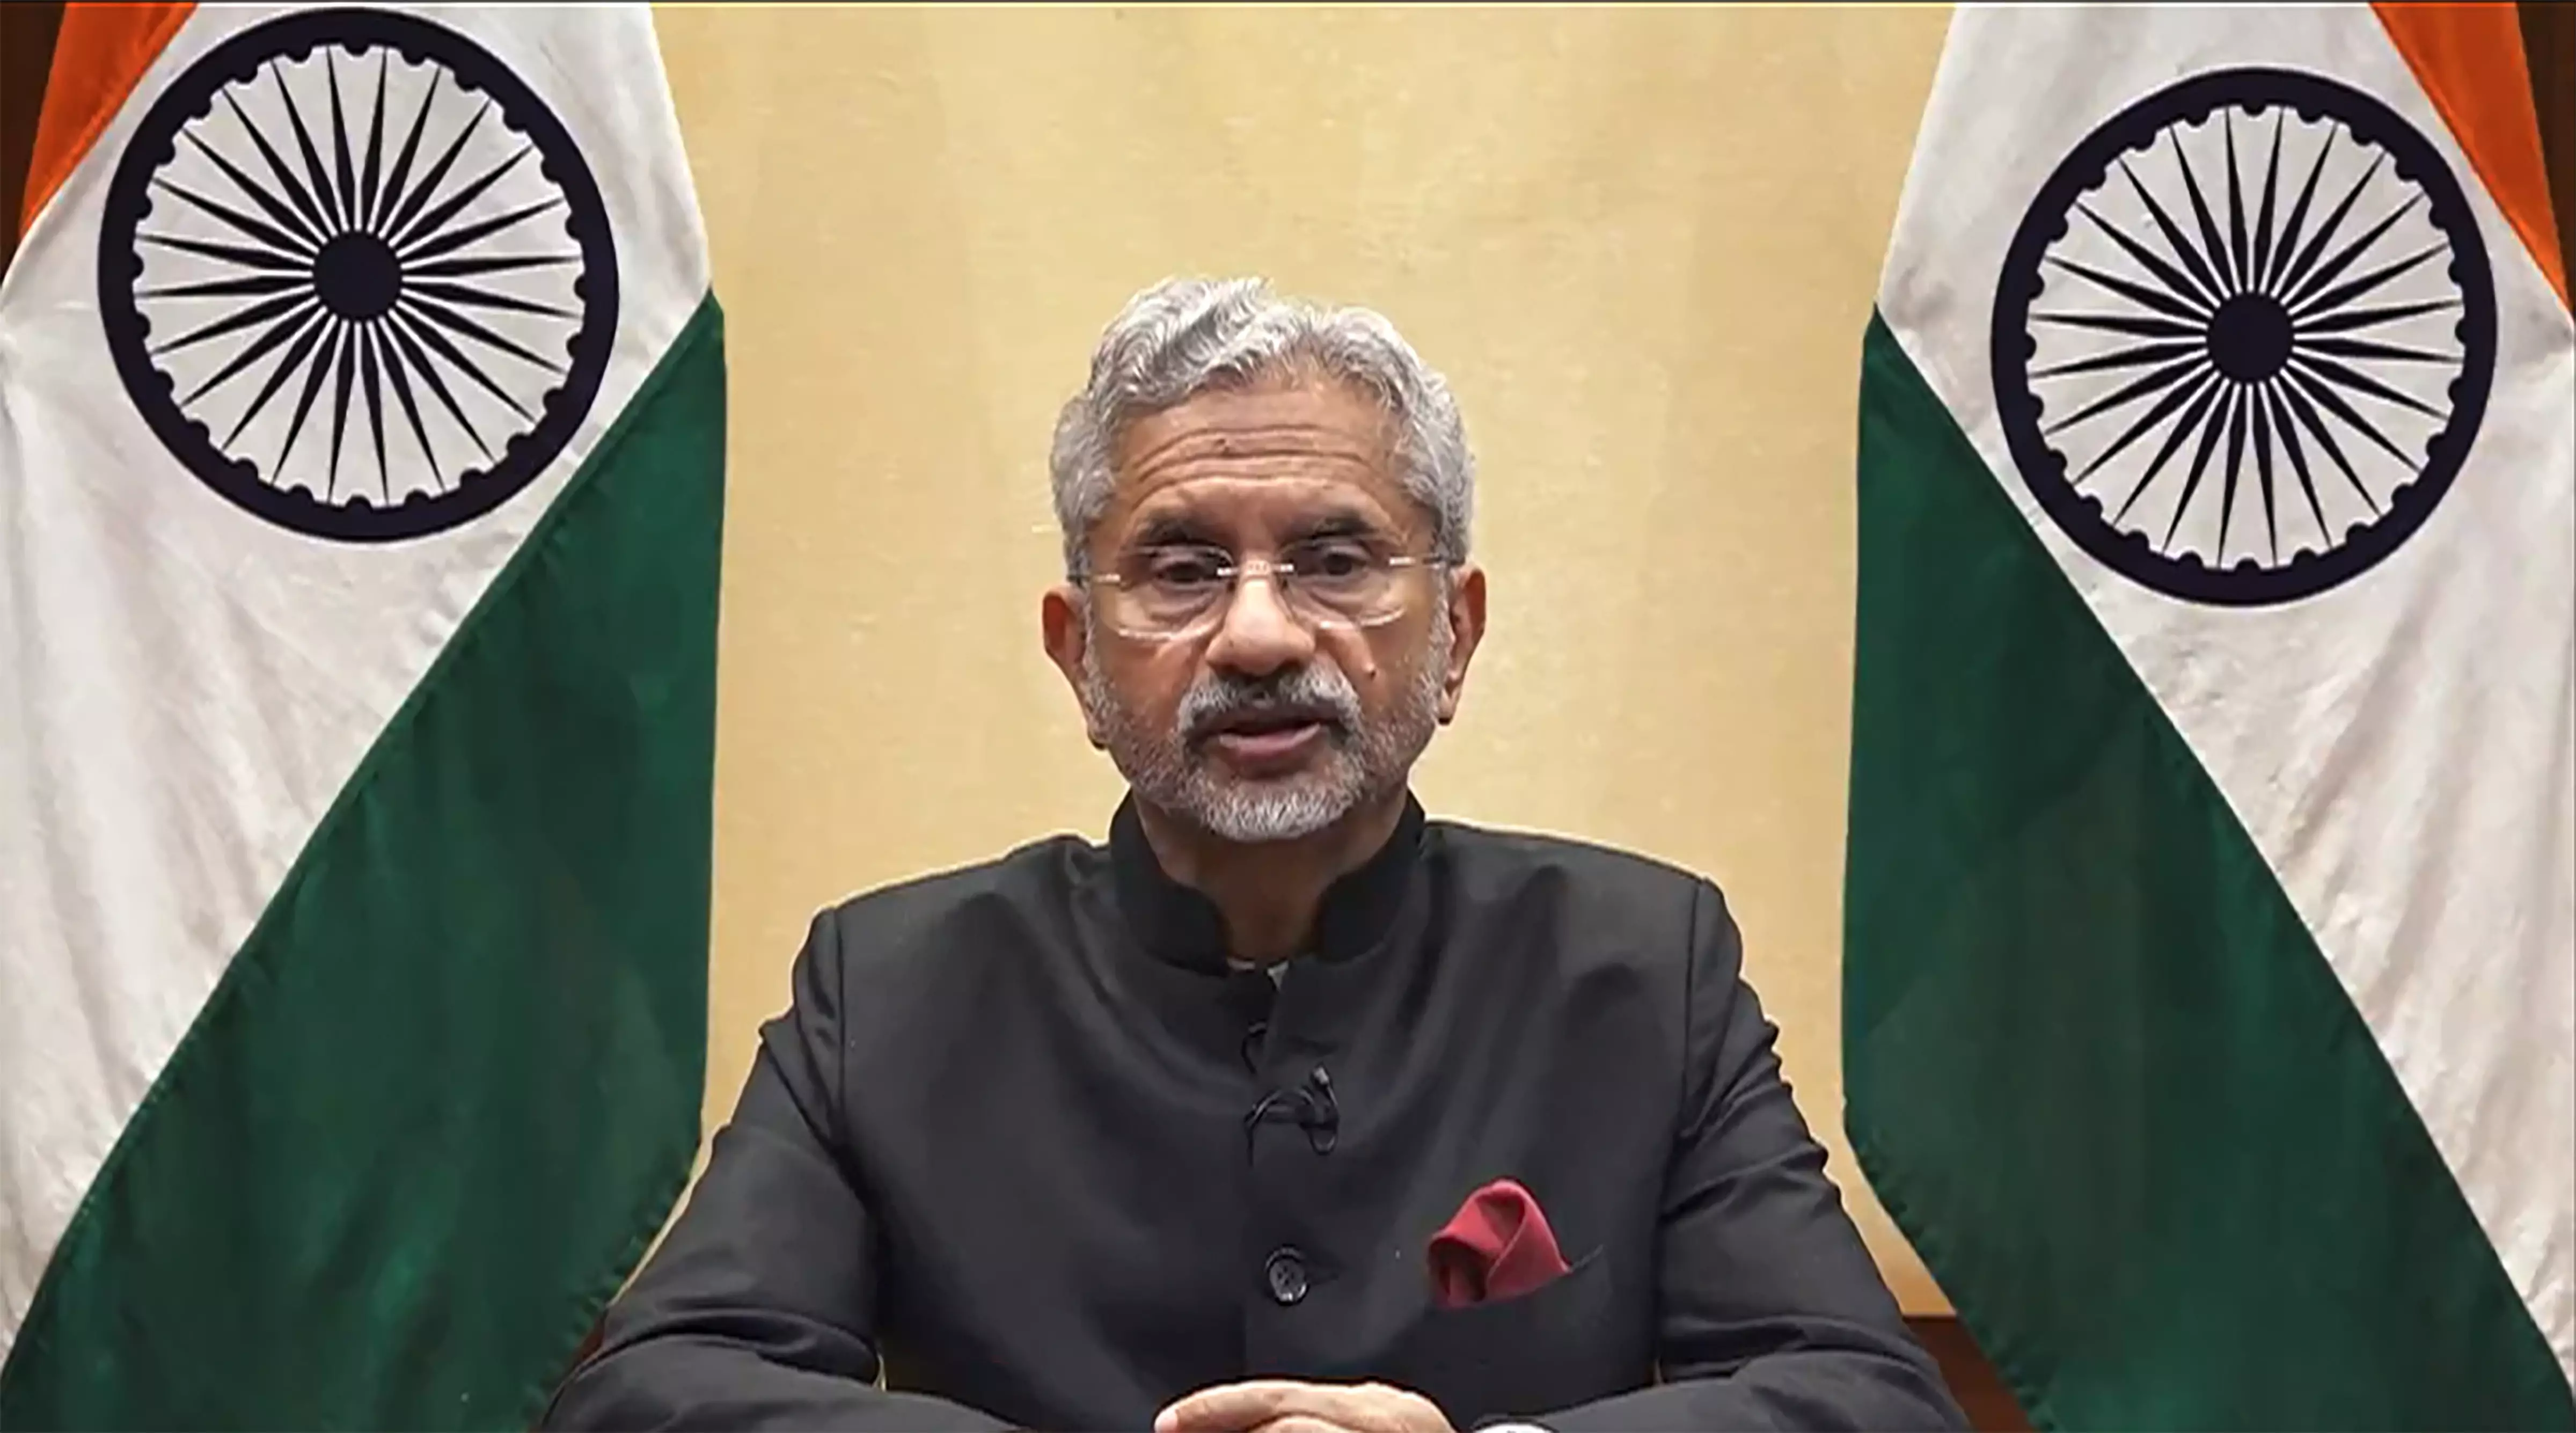 Indias policy on dealing with terrorism has changed since 2014, says Jaishankar